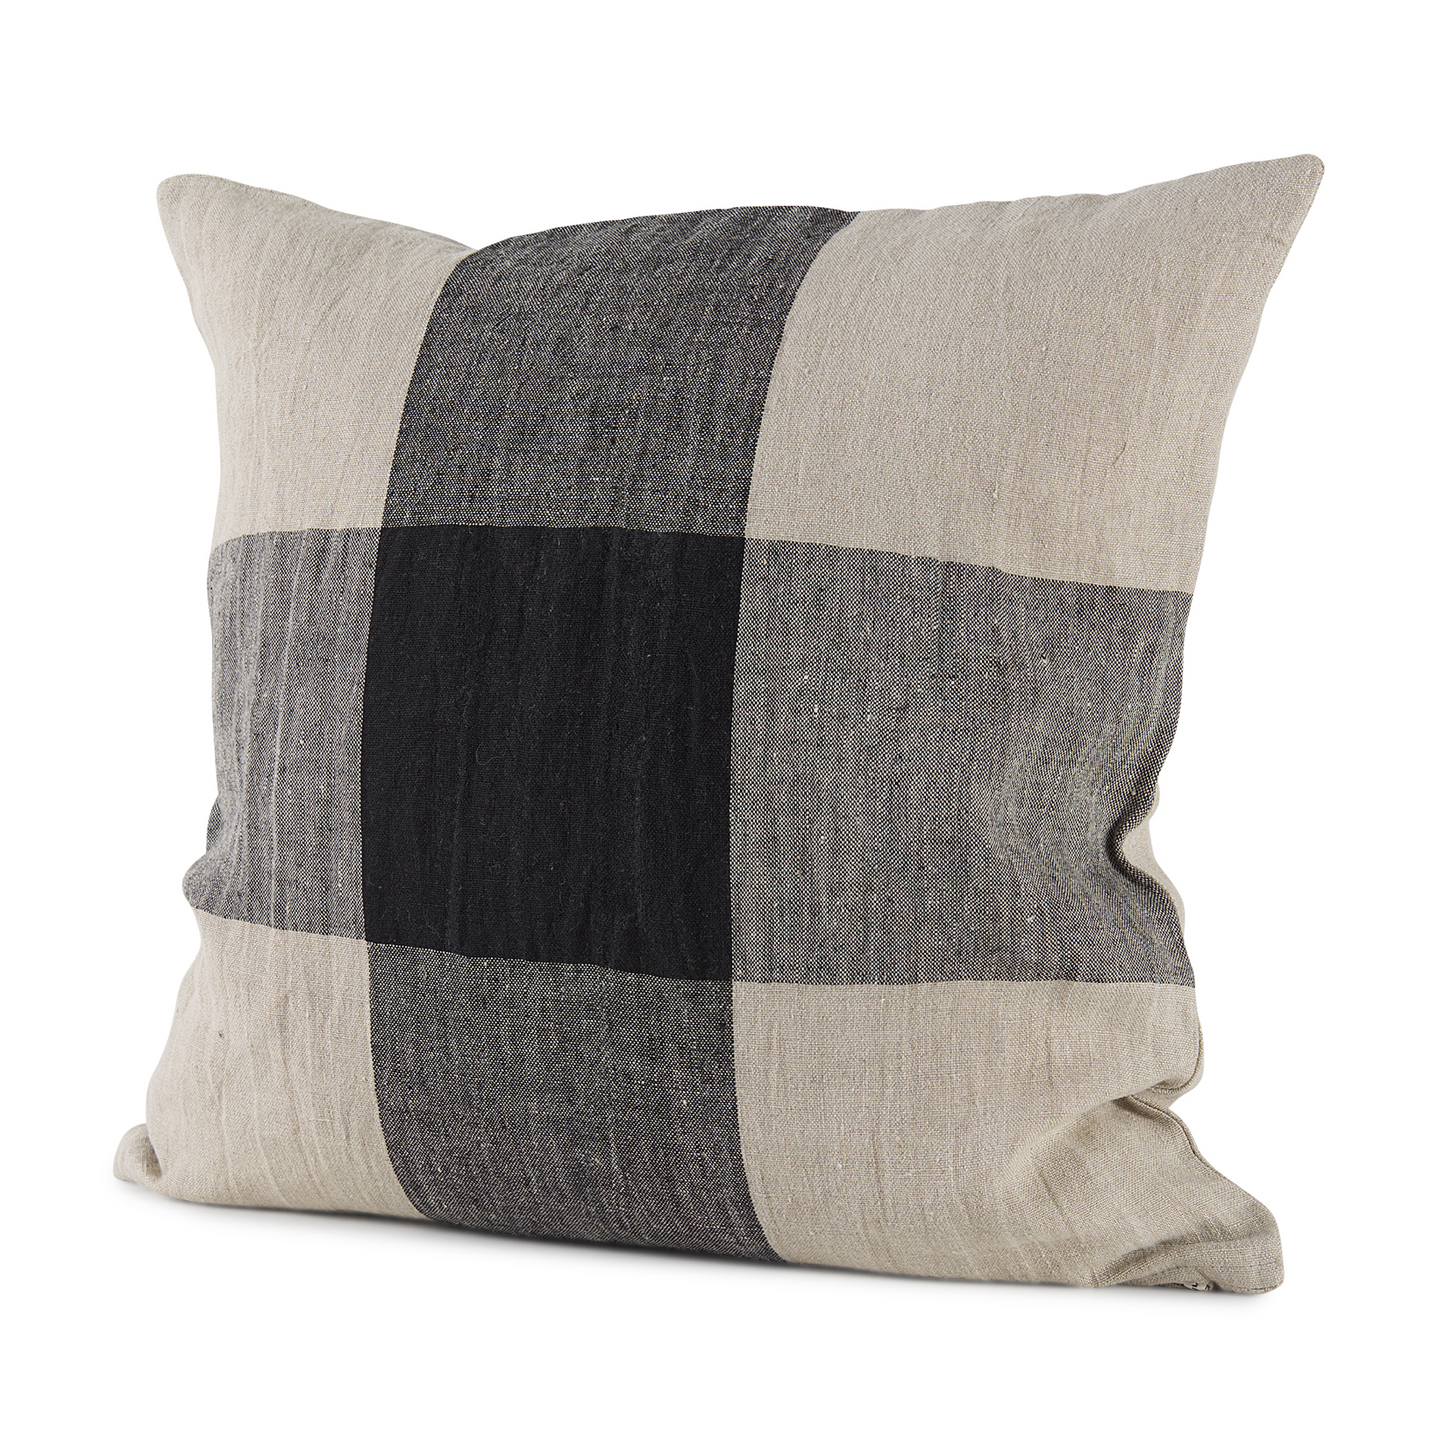 Black and Beige Plaid Throw Pillow, Square